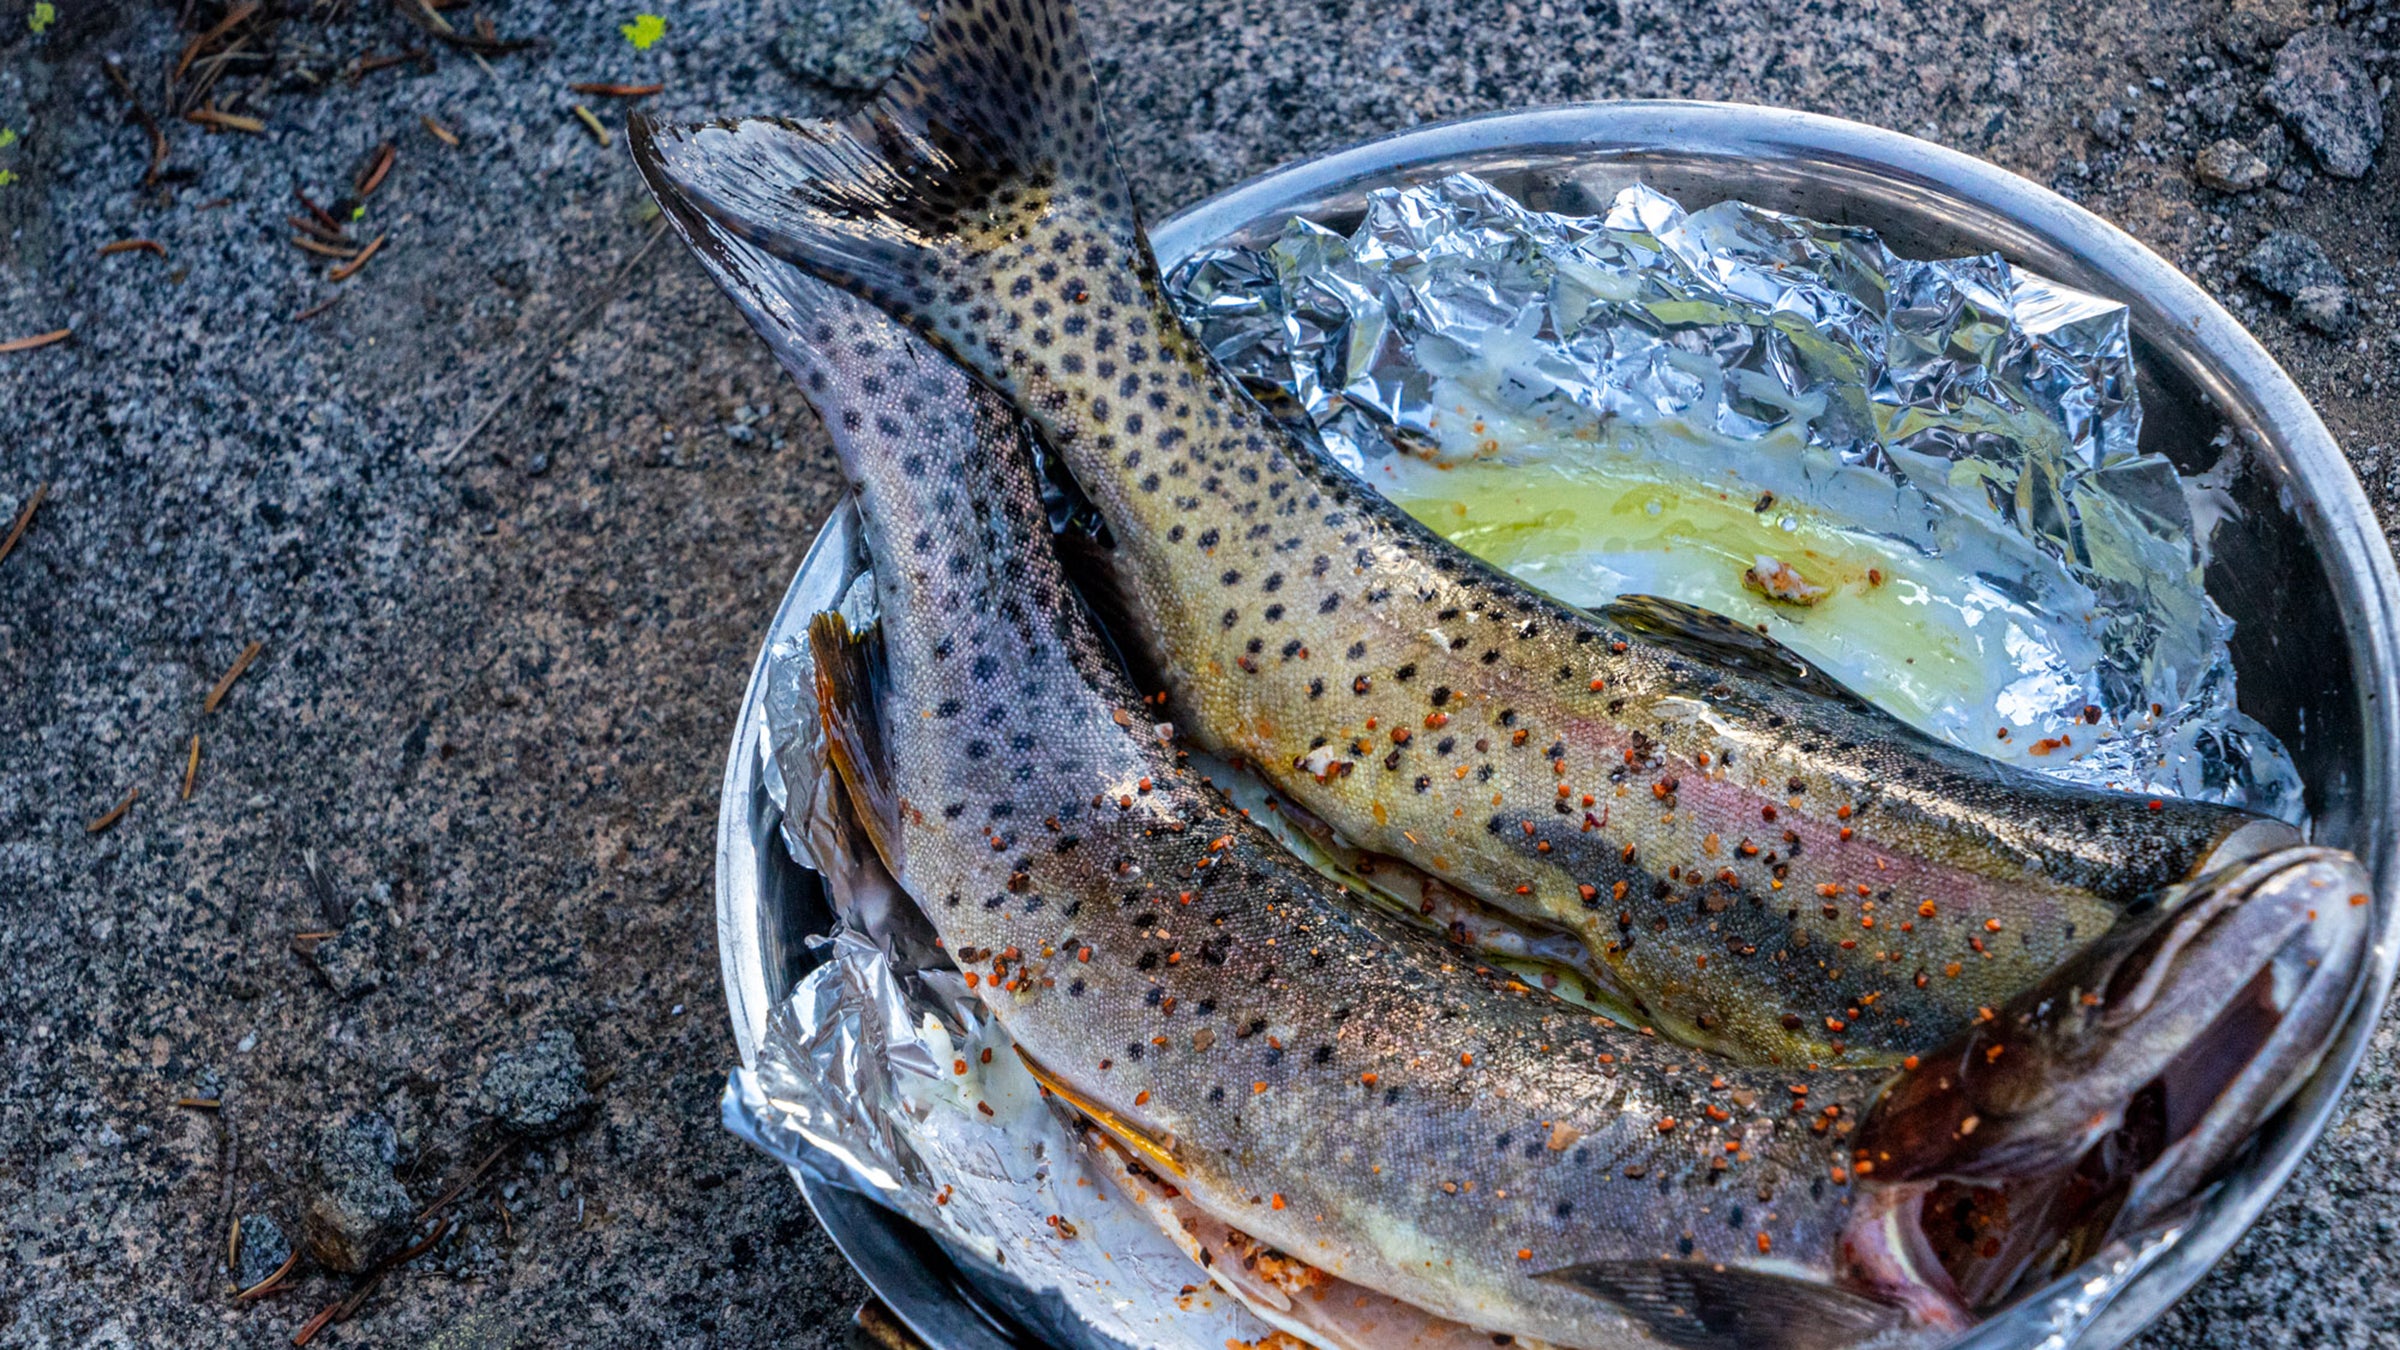 How to Clean, Cook, and Eat Trout in the Backcountry